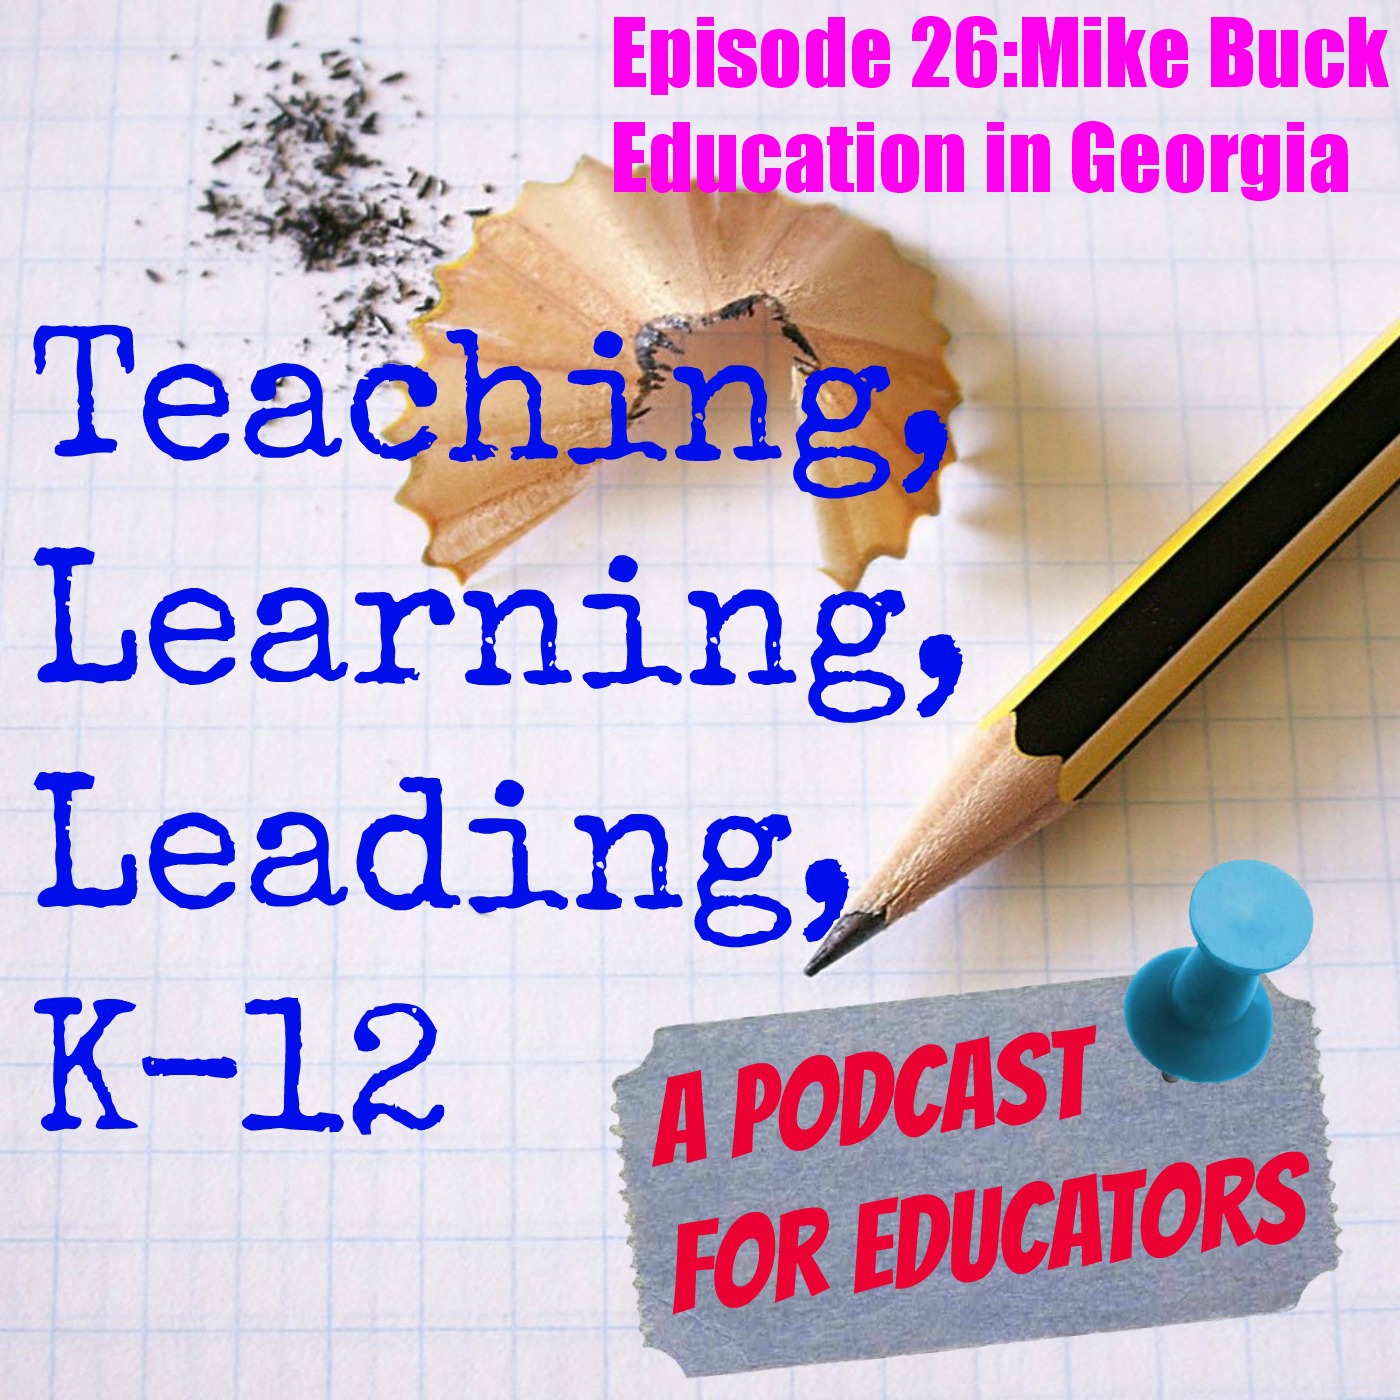 Episode 26: Mike Buck and Public Education in Georgia